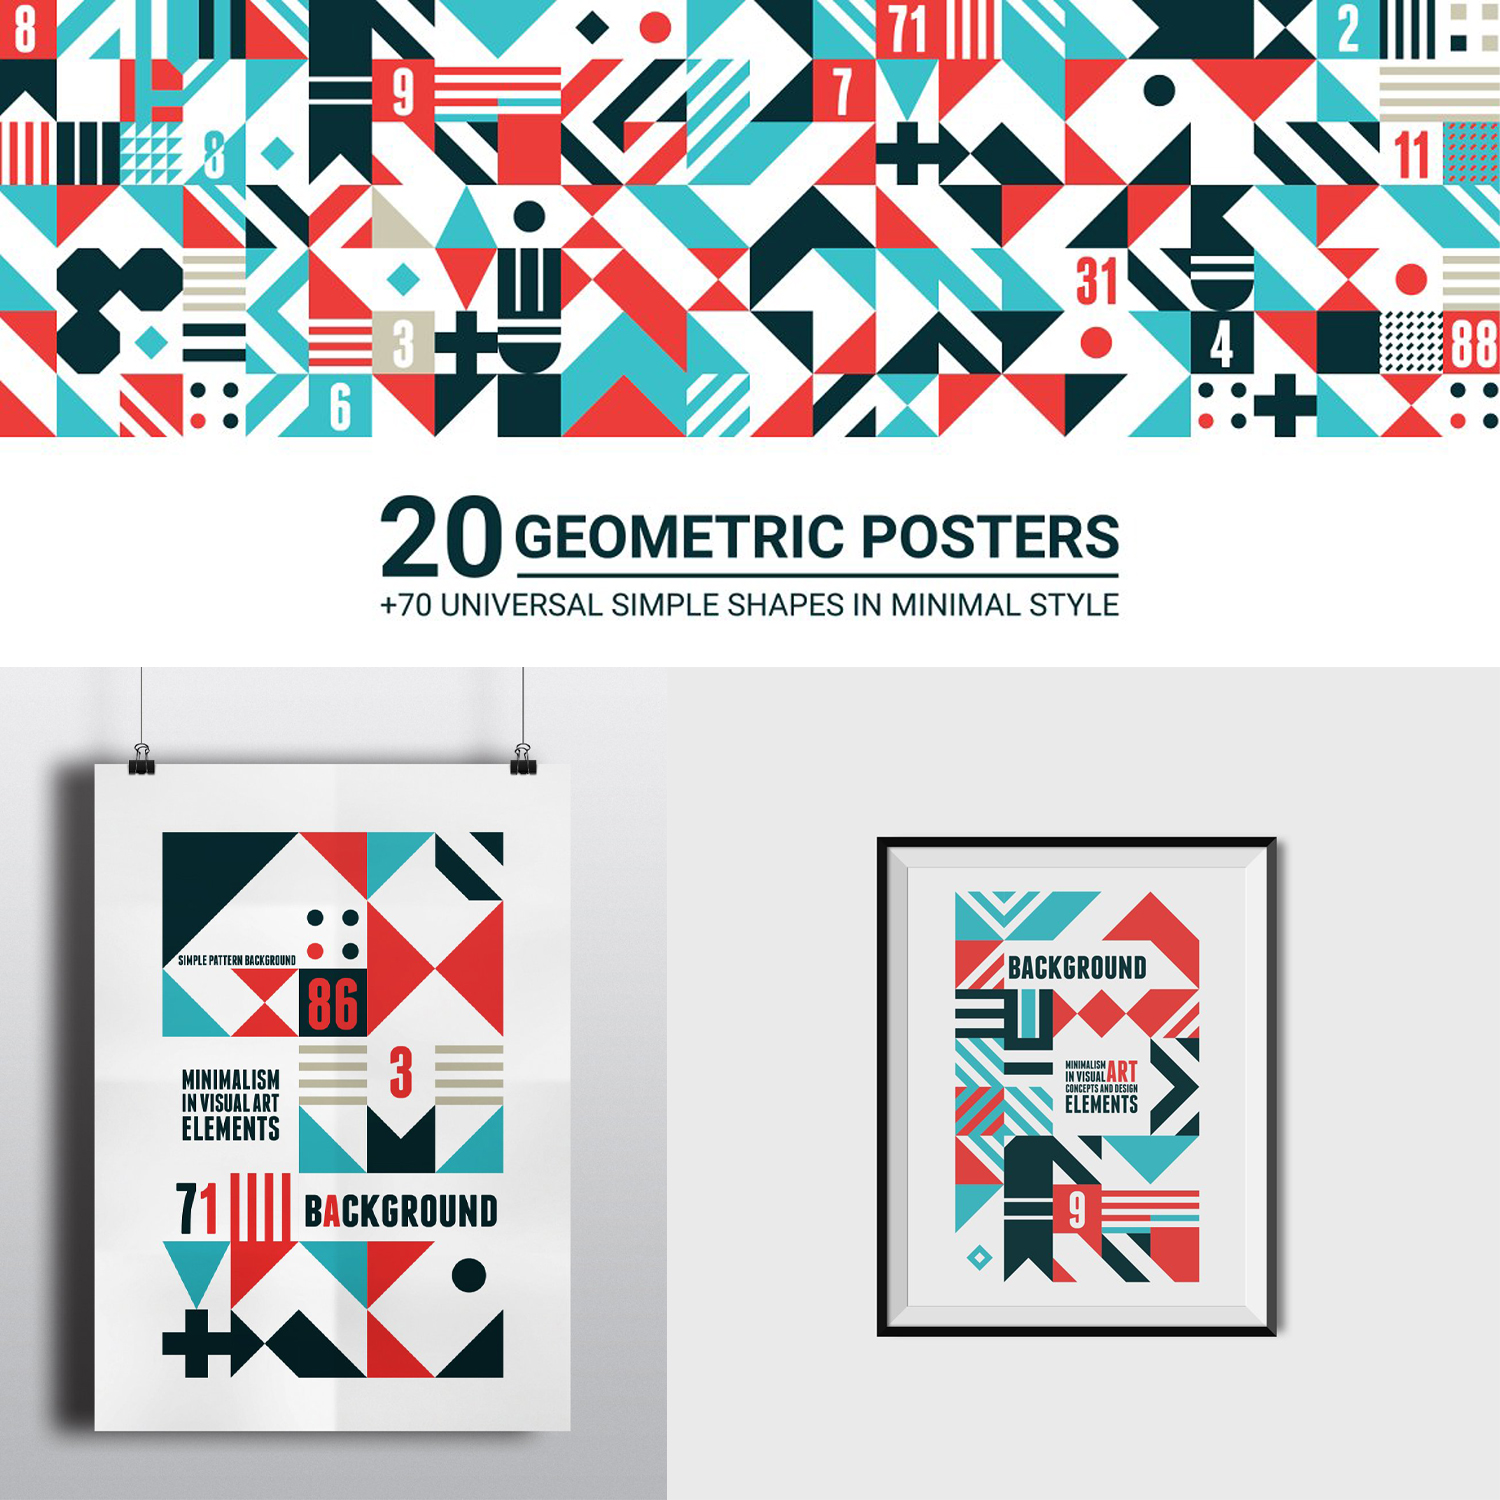 Geometric posters in red, blue and green.